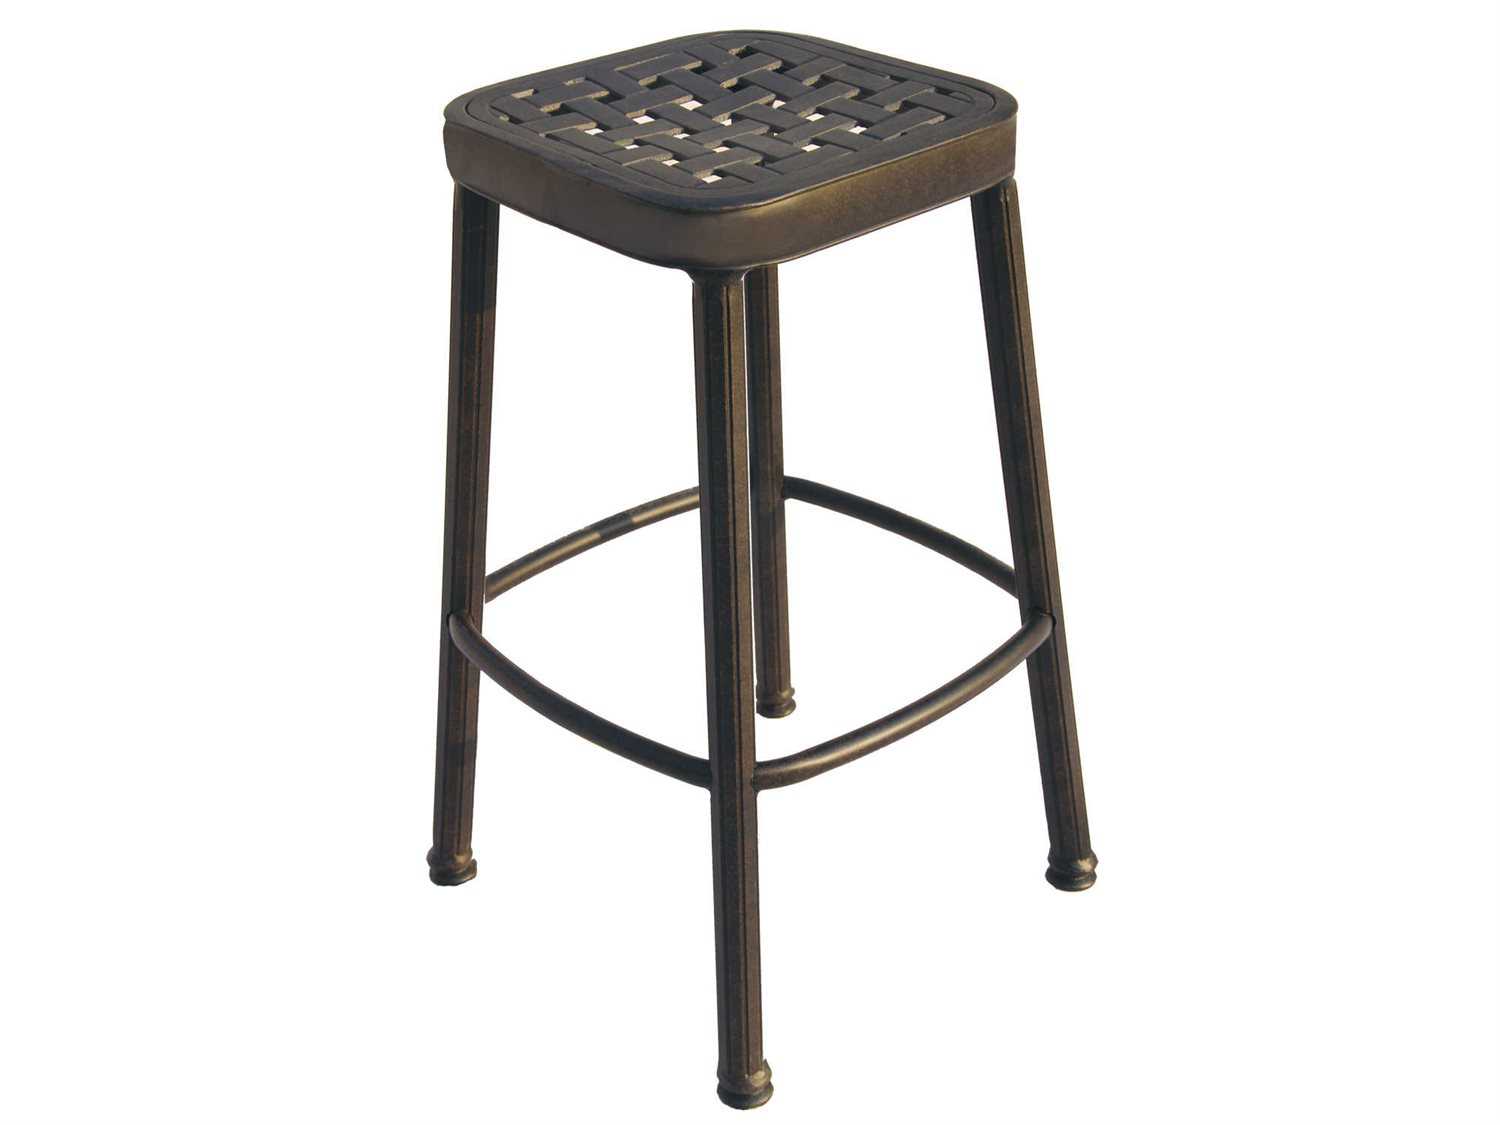 Darlee Outdoor Living Backless, Replacement Bar Stool Seats